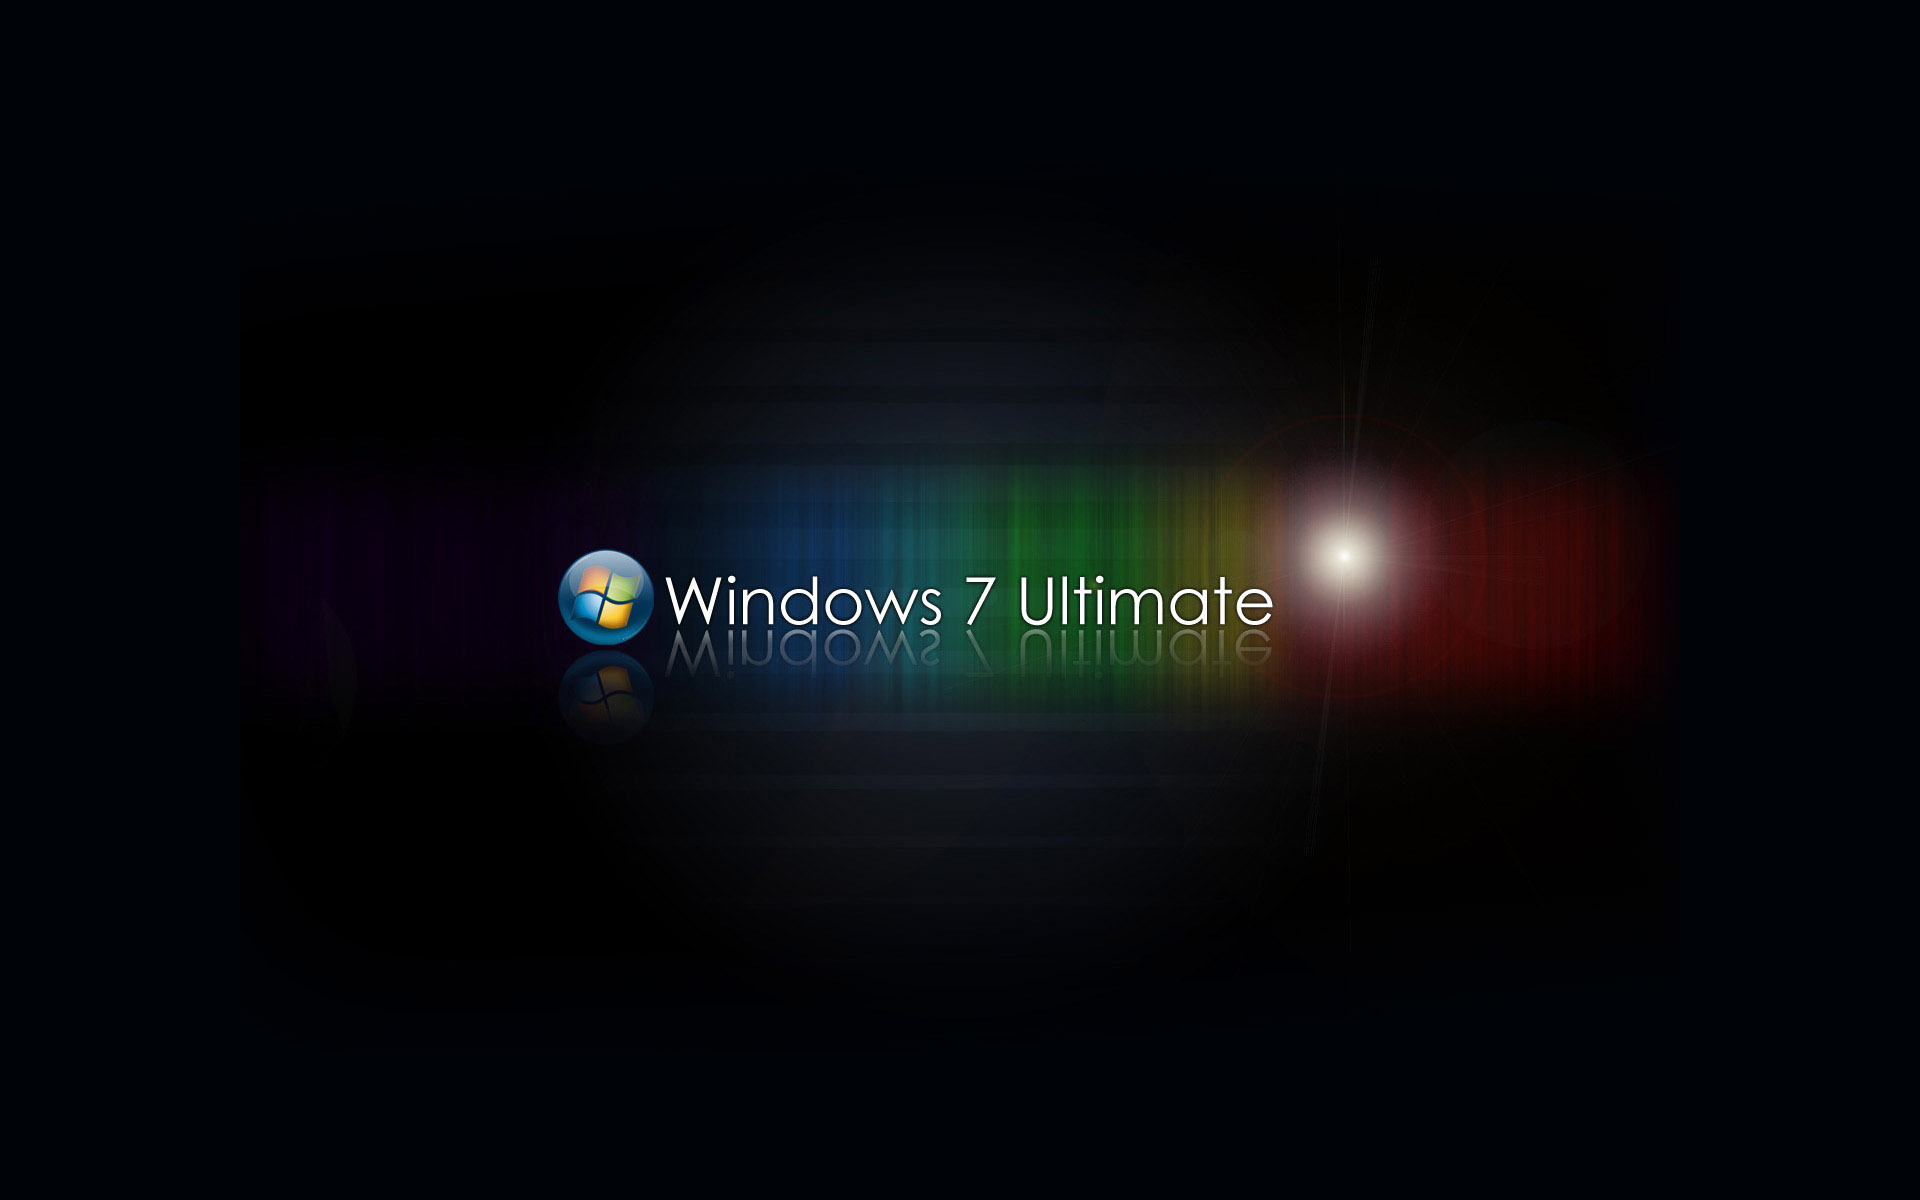 Windows 7 Ultimate HD Wallpapers and Backgrounds